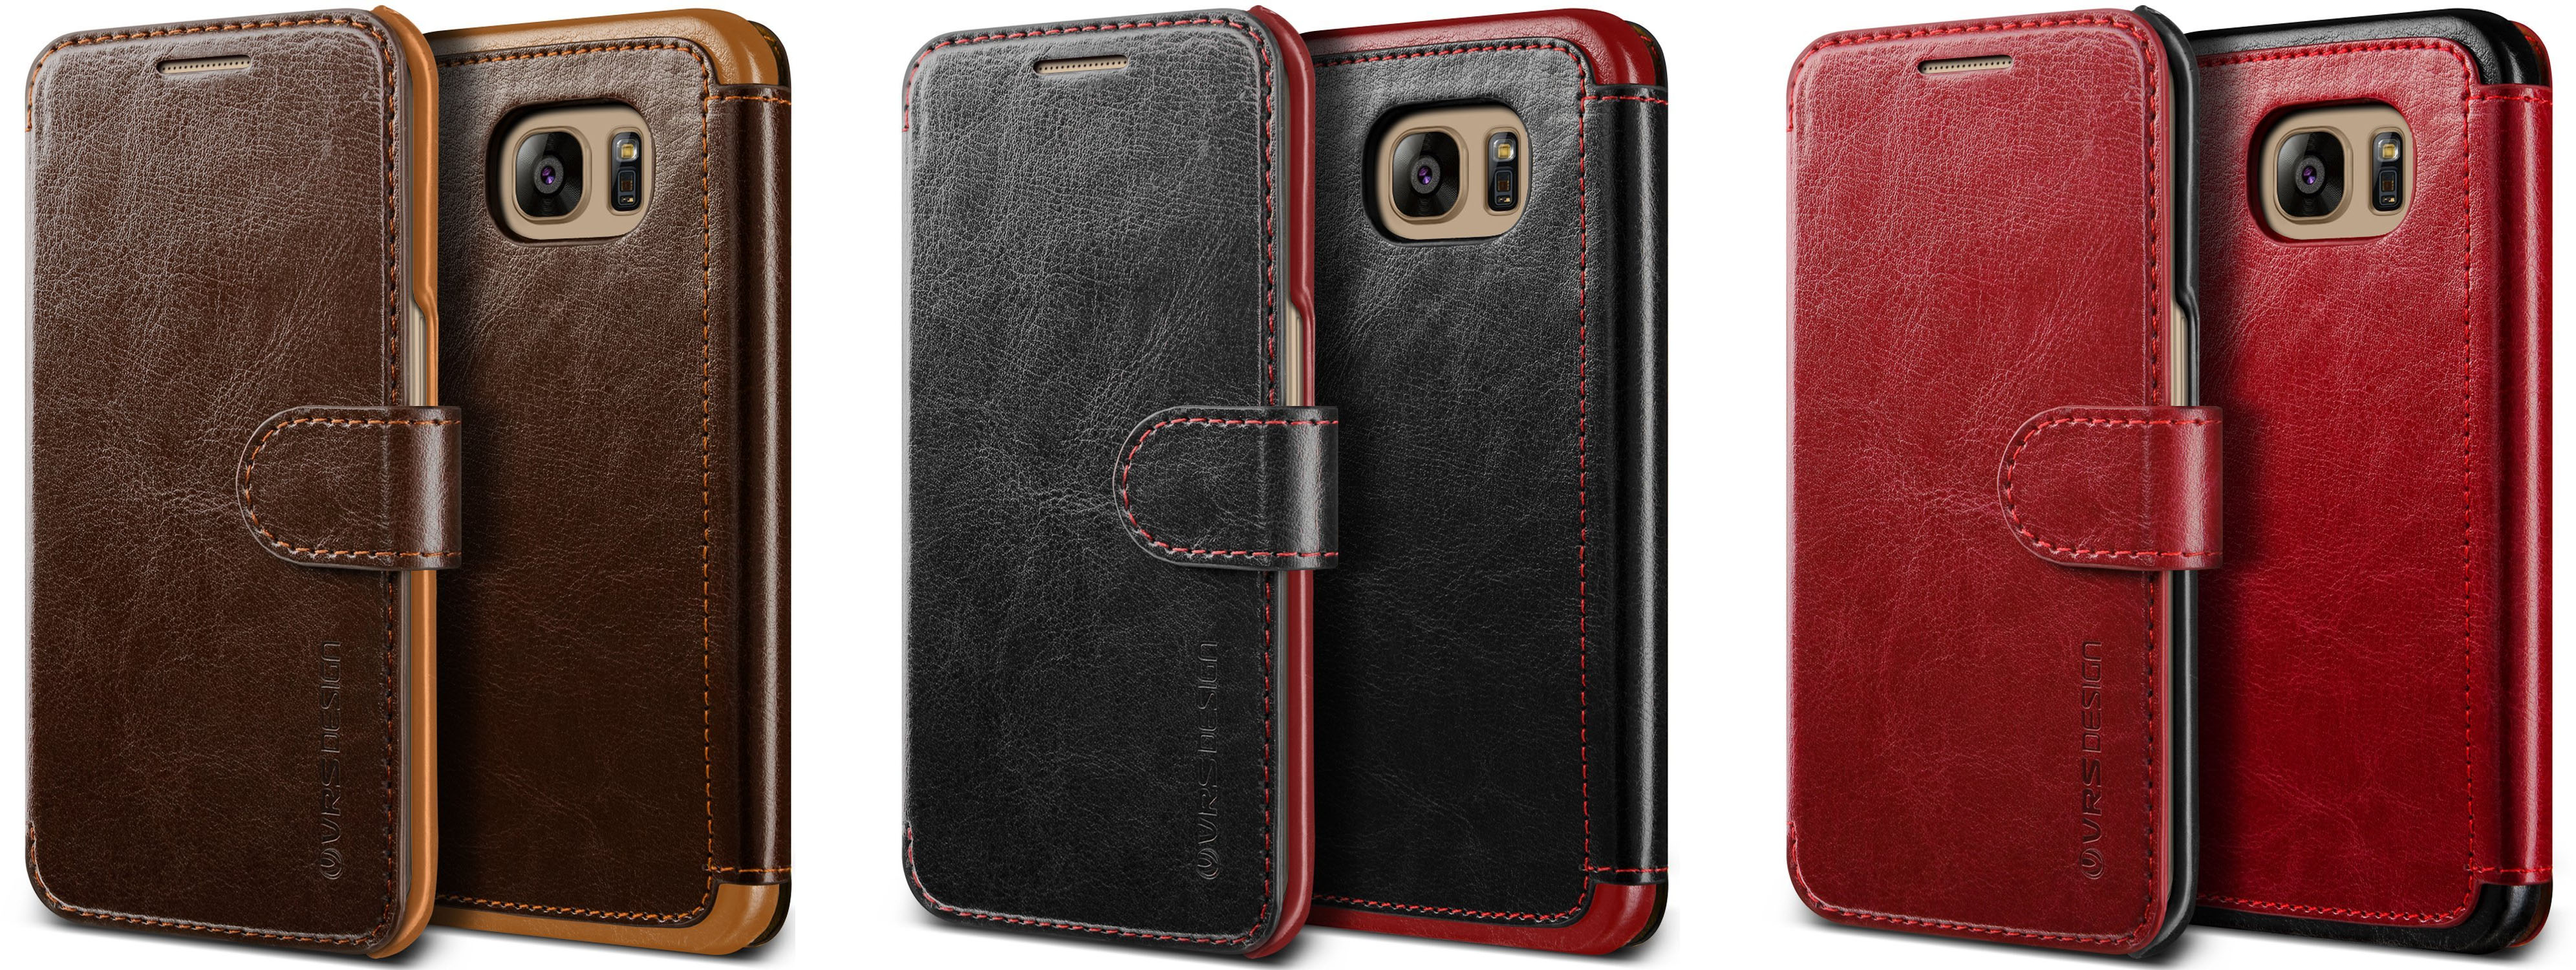 Galaxy S7 Edge Case Card Slot PU Leather Wallet